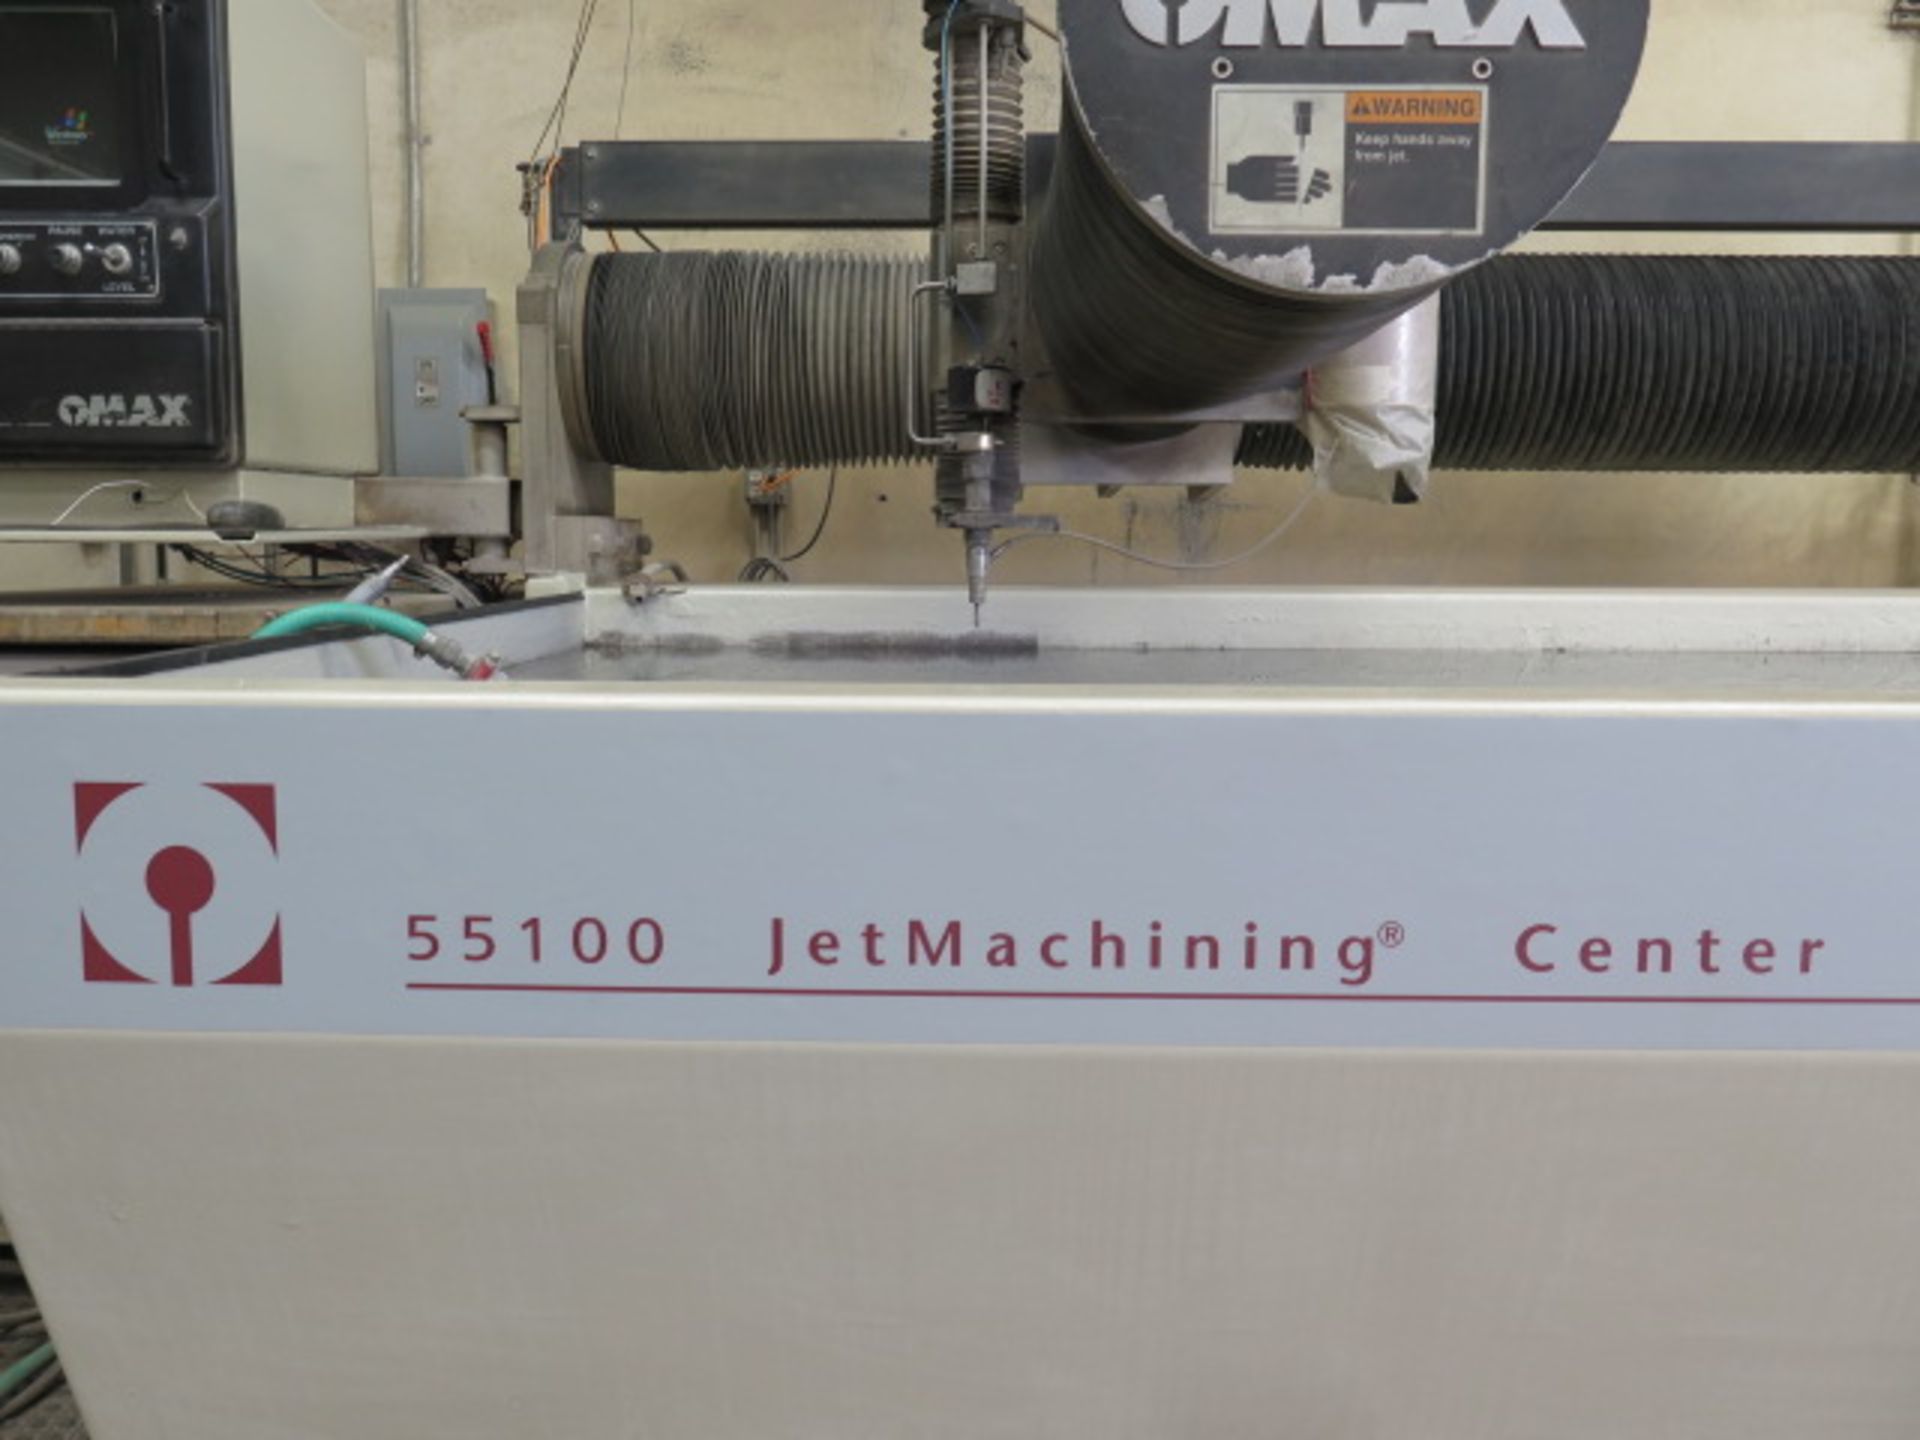 Omax mdl. 55100 5’ x 10’ CNC WaterJet Machine s/n B511750 w/ Omax MAKE Precision Velocity,SOLD AS IS - Image 16 of 24